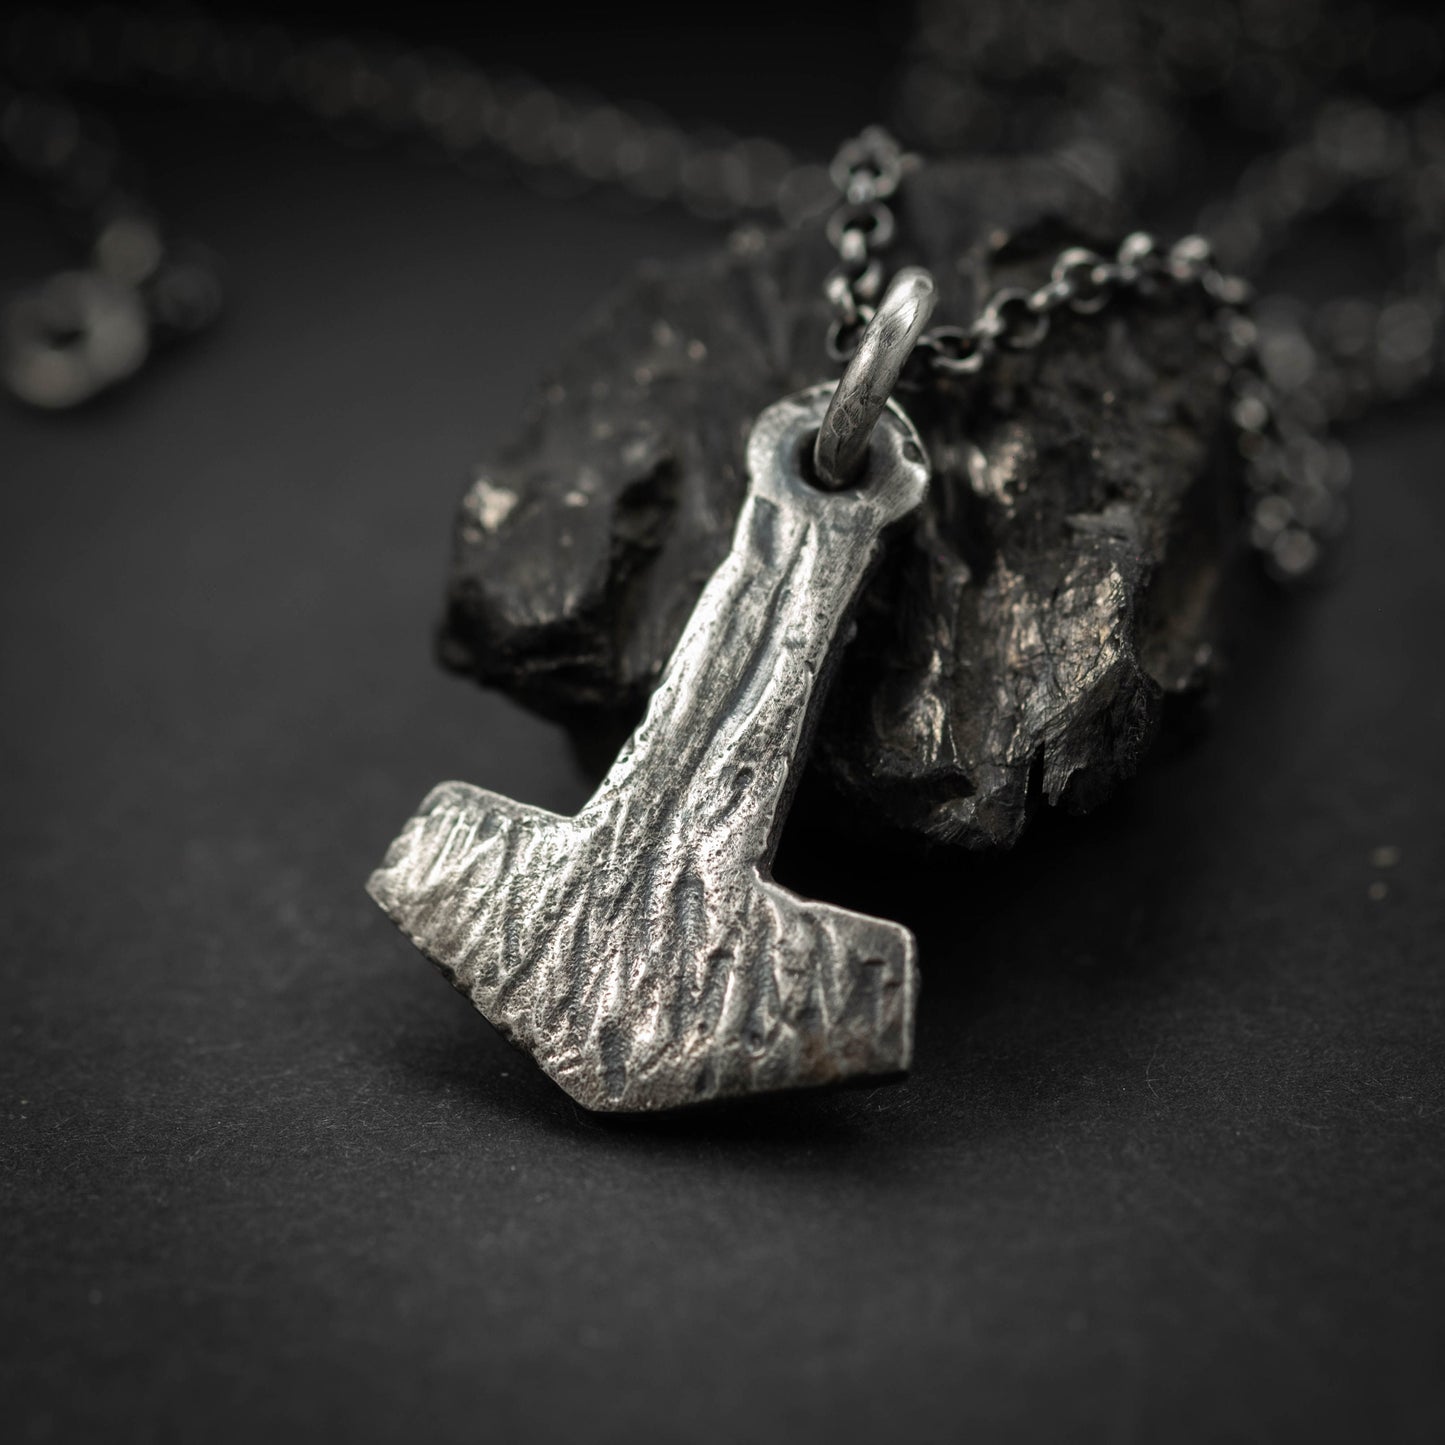 Mjolnir pendant, Viking jewelry, Thors War hammer pendant necklace, celtic jewelry Gift for him, Boyfriend gifts, Norse jewelry, mens gift